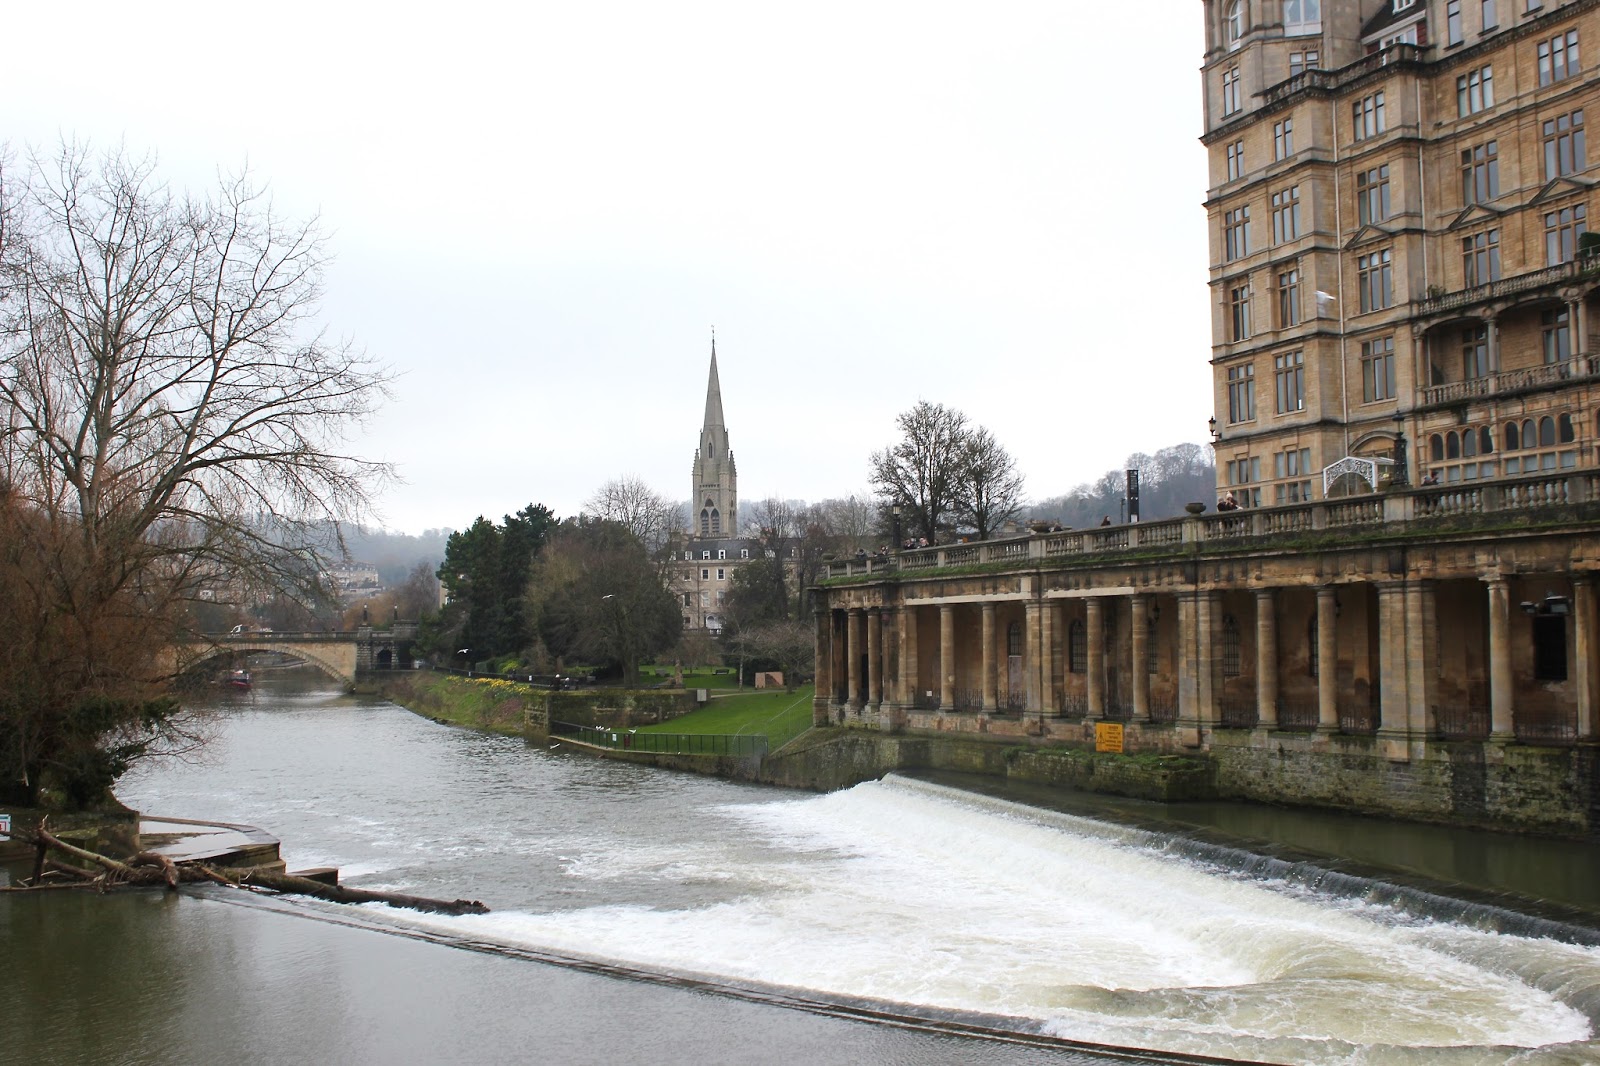 travel guide about Bath, talking about what to do, where to eat, and where to stay. Including the Roman Baths, Bath Abbey and Gray's Boutique B&B